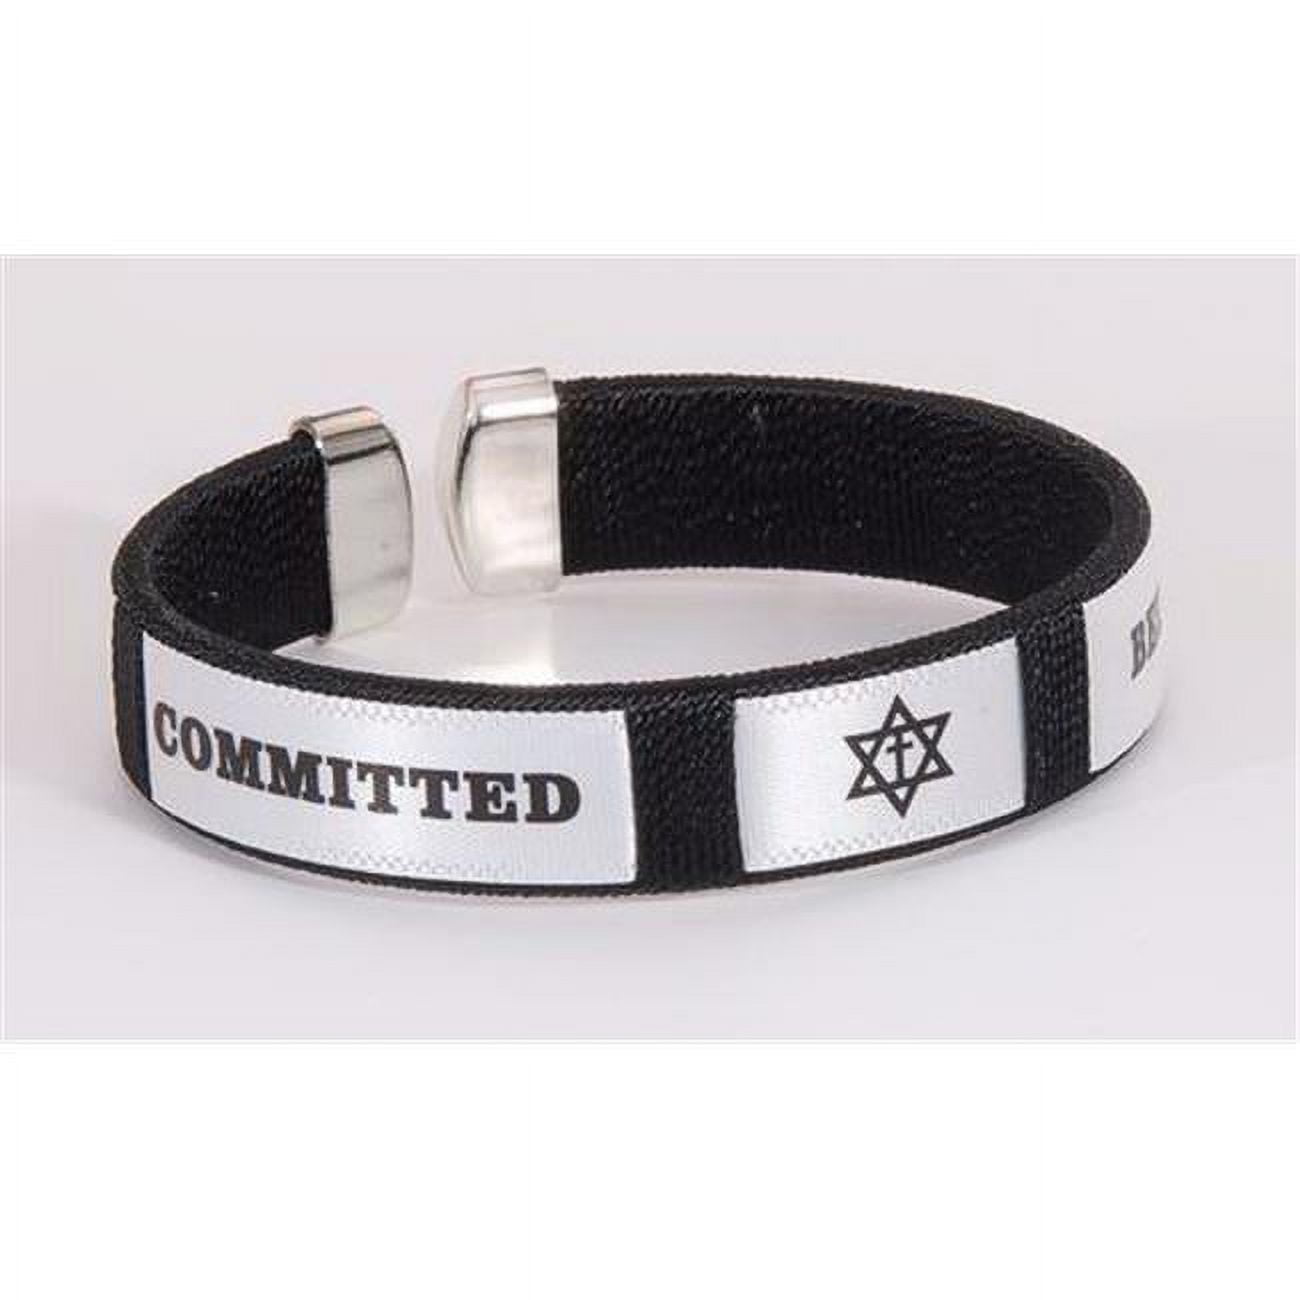 157548 Committed Believer Bracelet - Cuff-black - No.9815